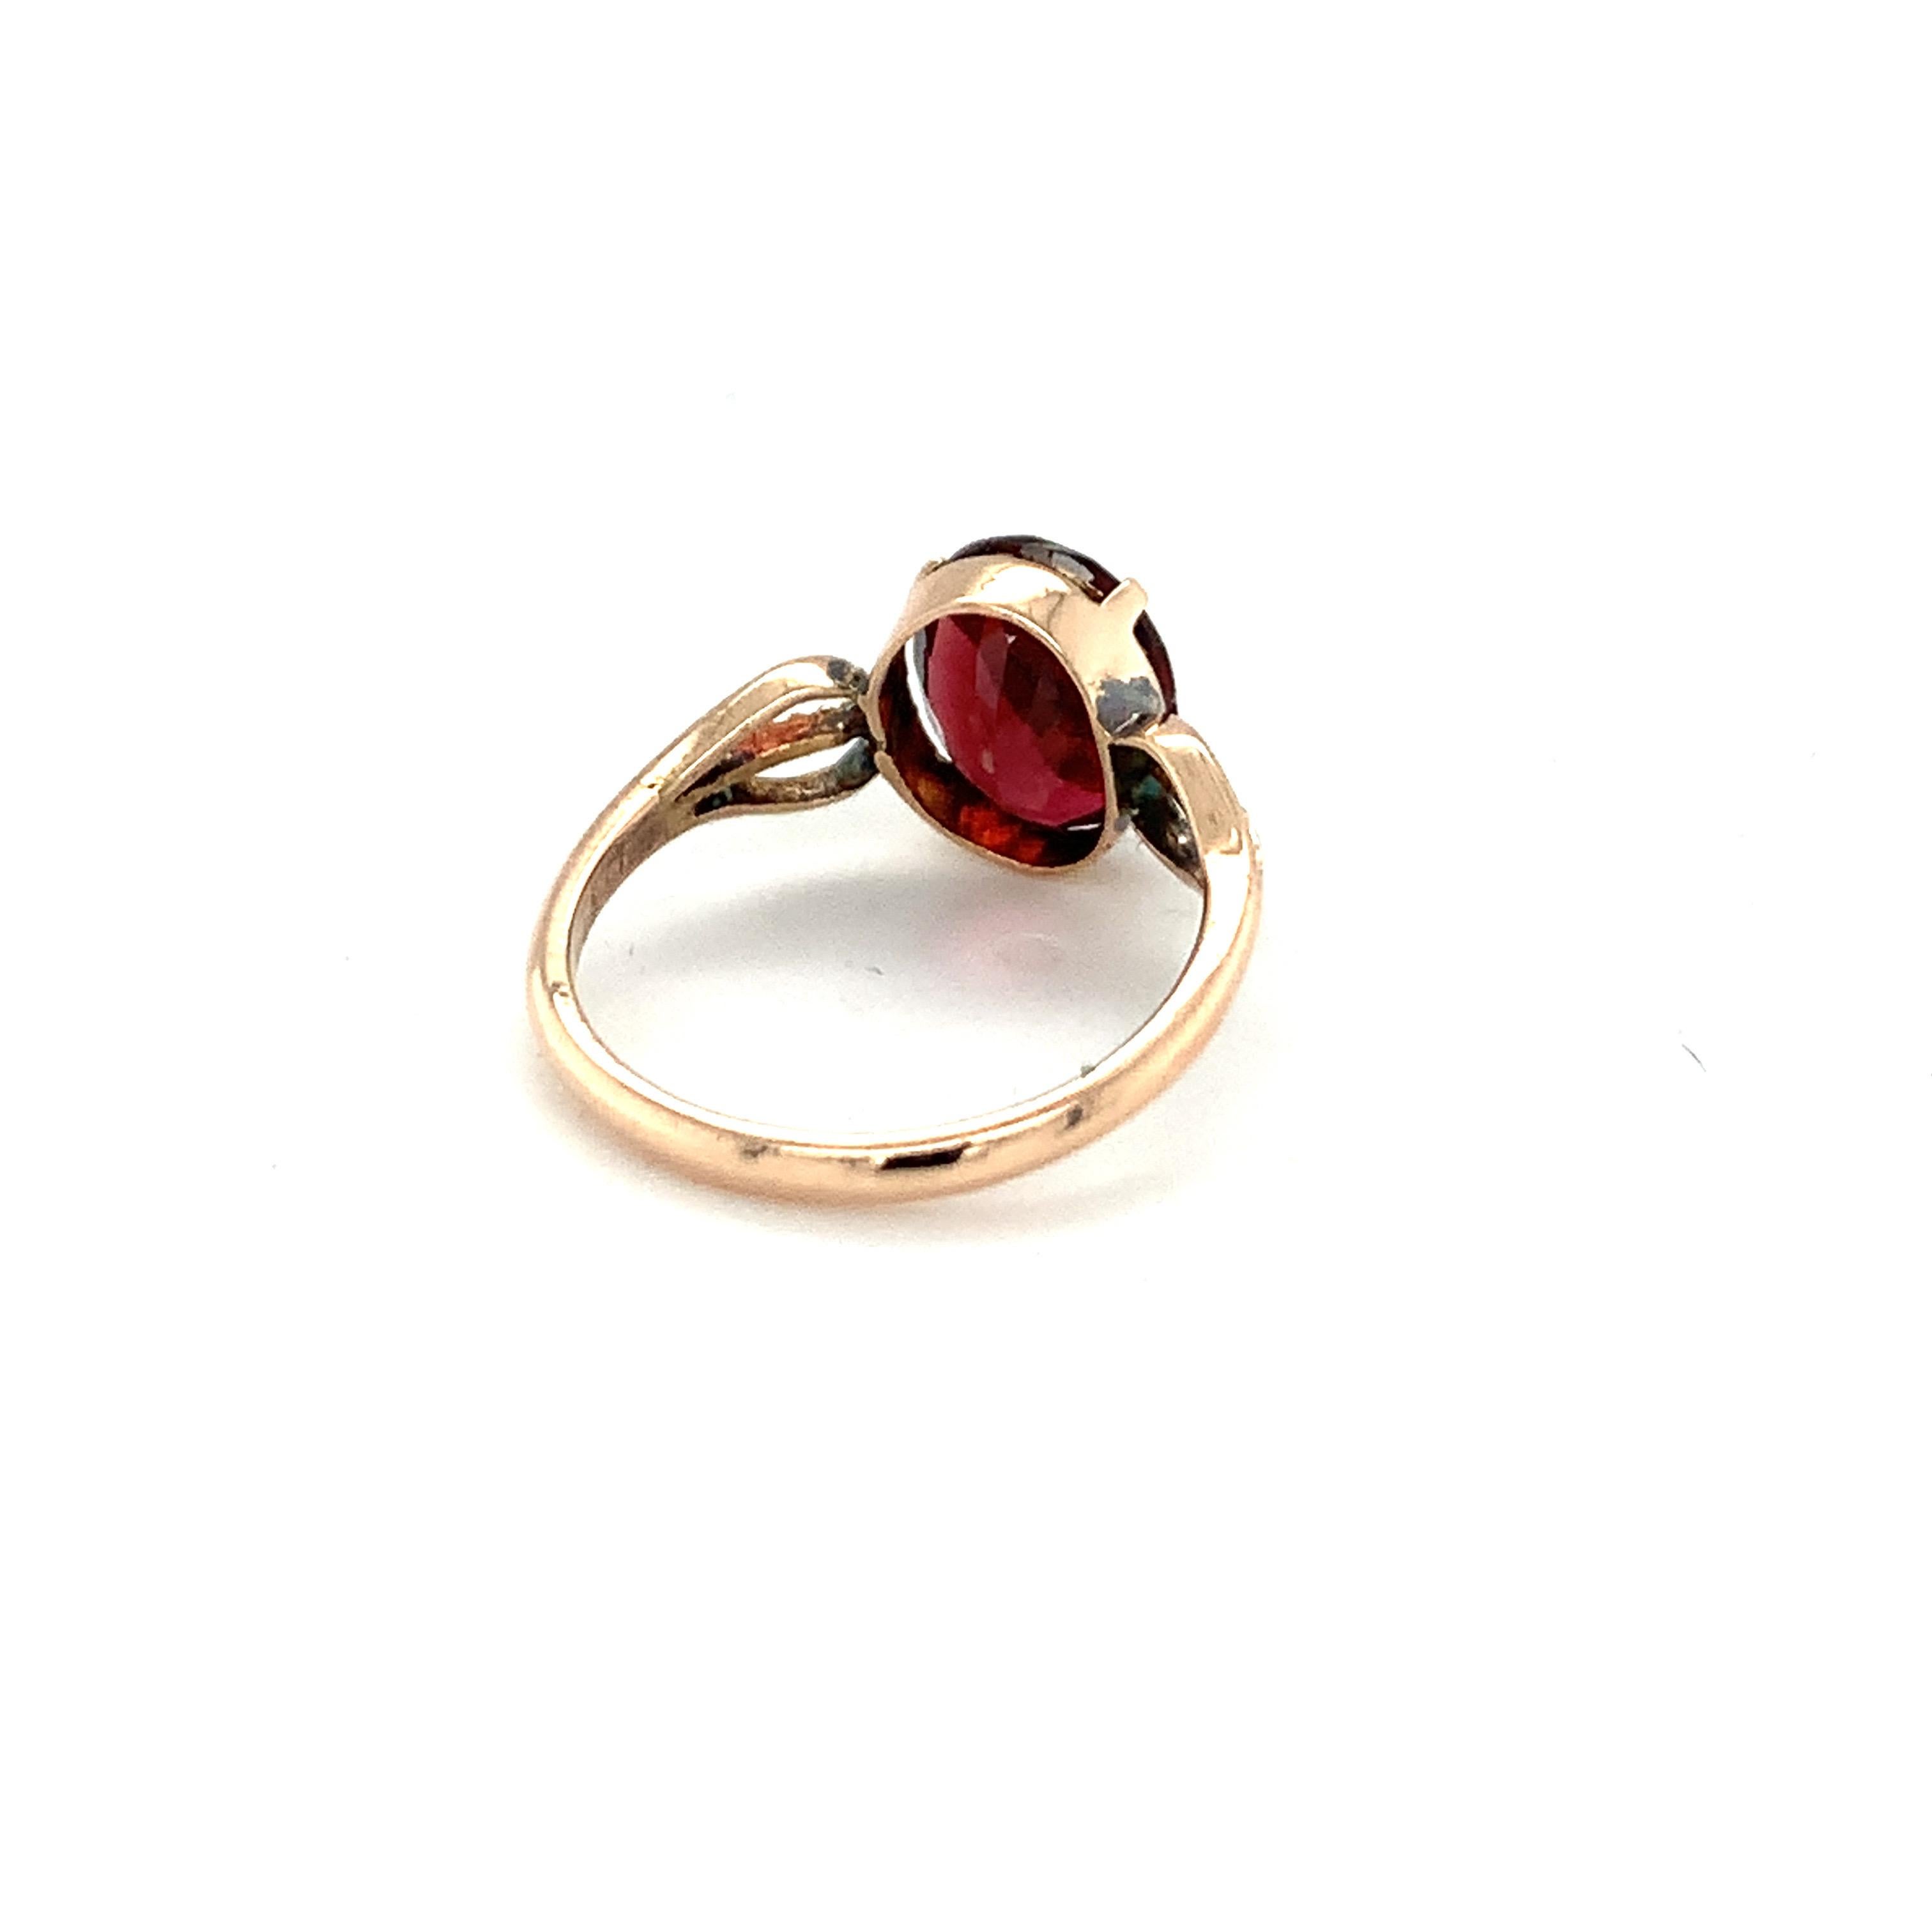 Hand cut and polished natural tourmaline ring is crafted with hand in 14K yellow gold. 
Ideal for daily casual wear.
Image is enlarged for a closer look
Ethically sourced natural gem stone.